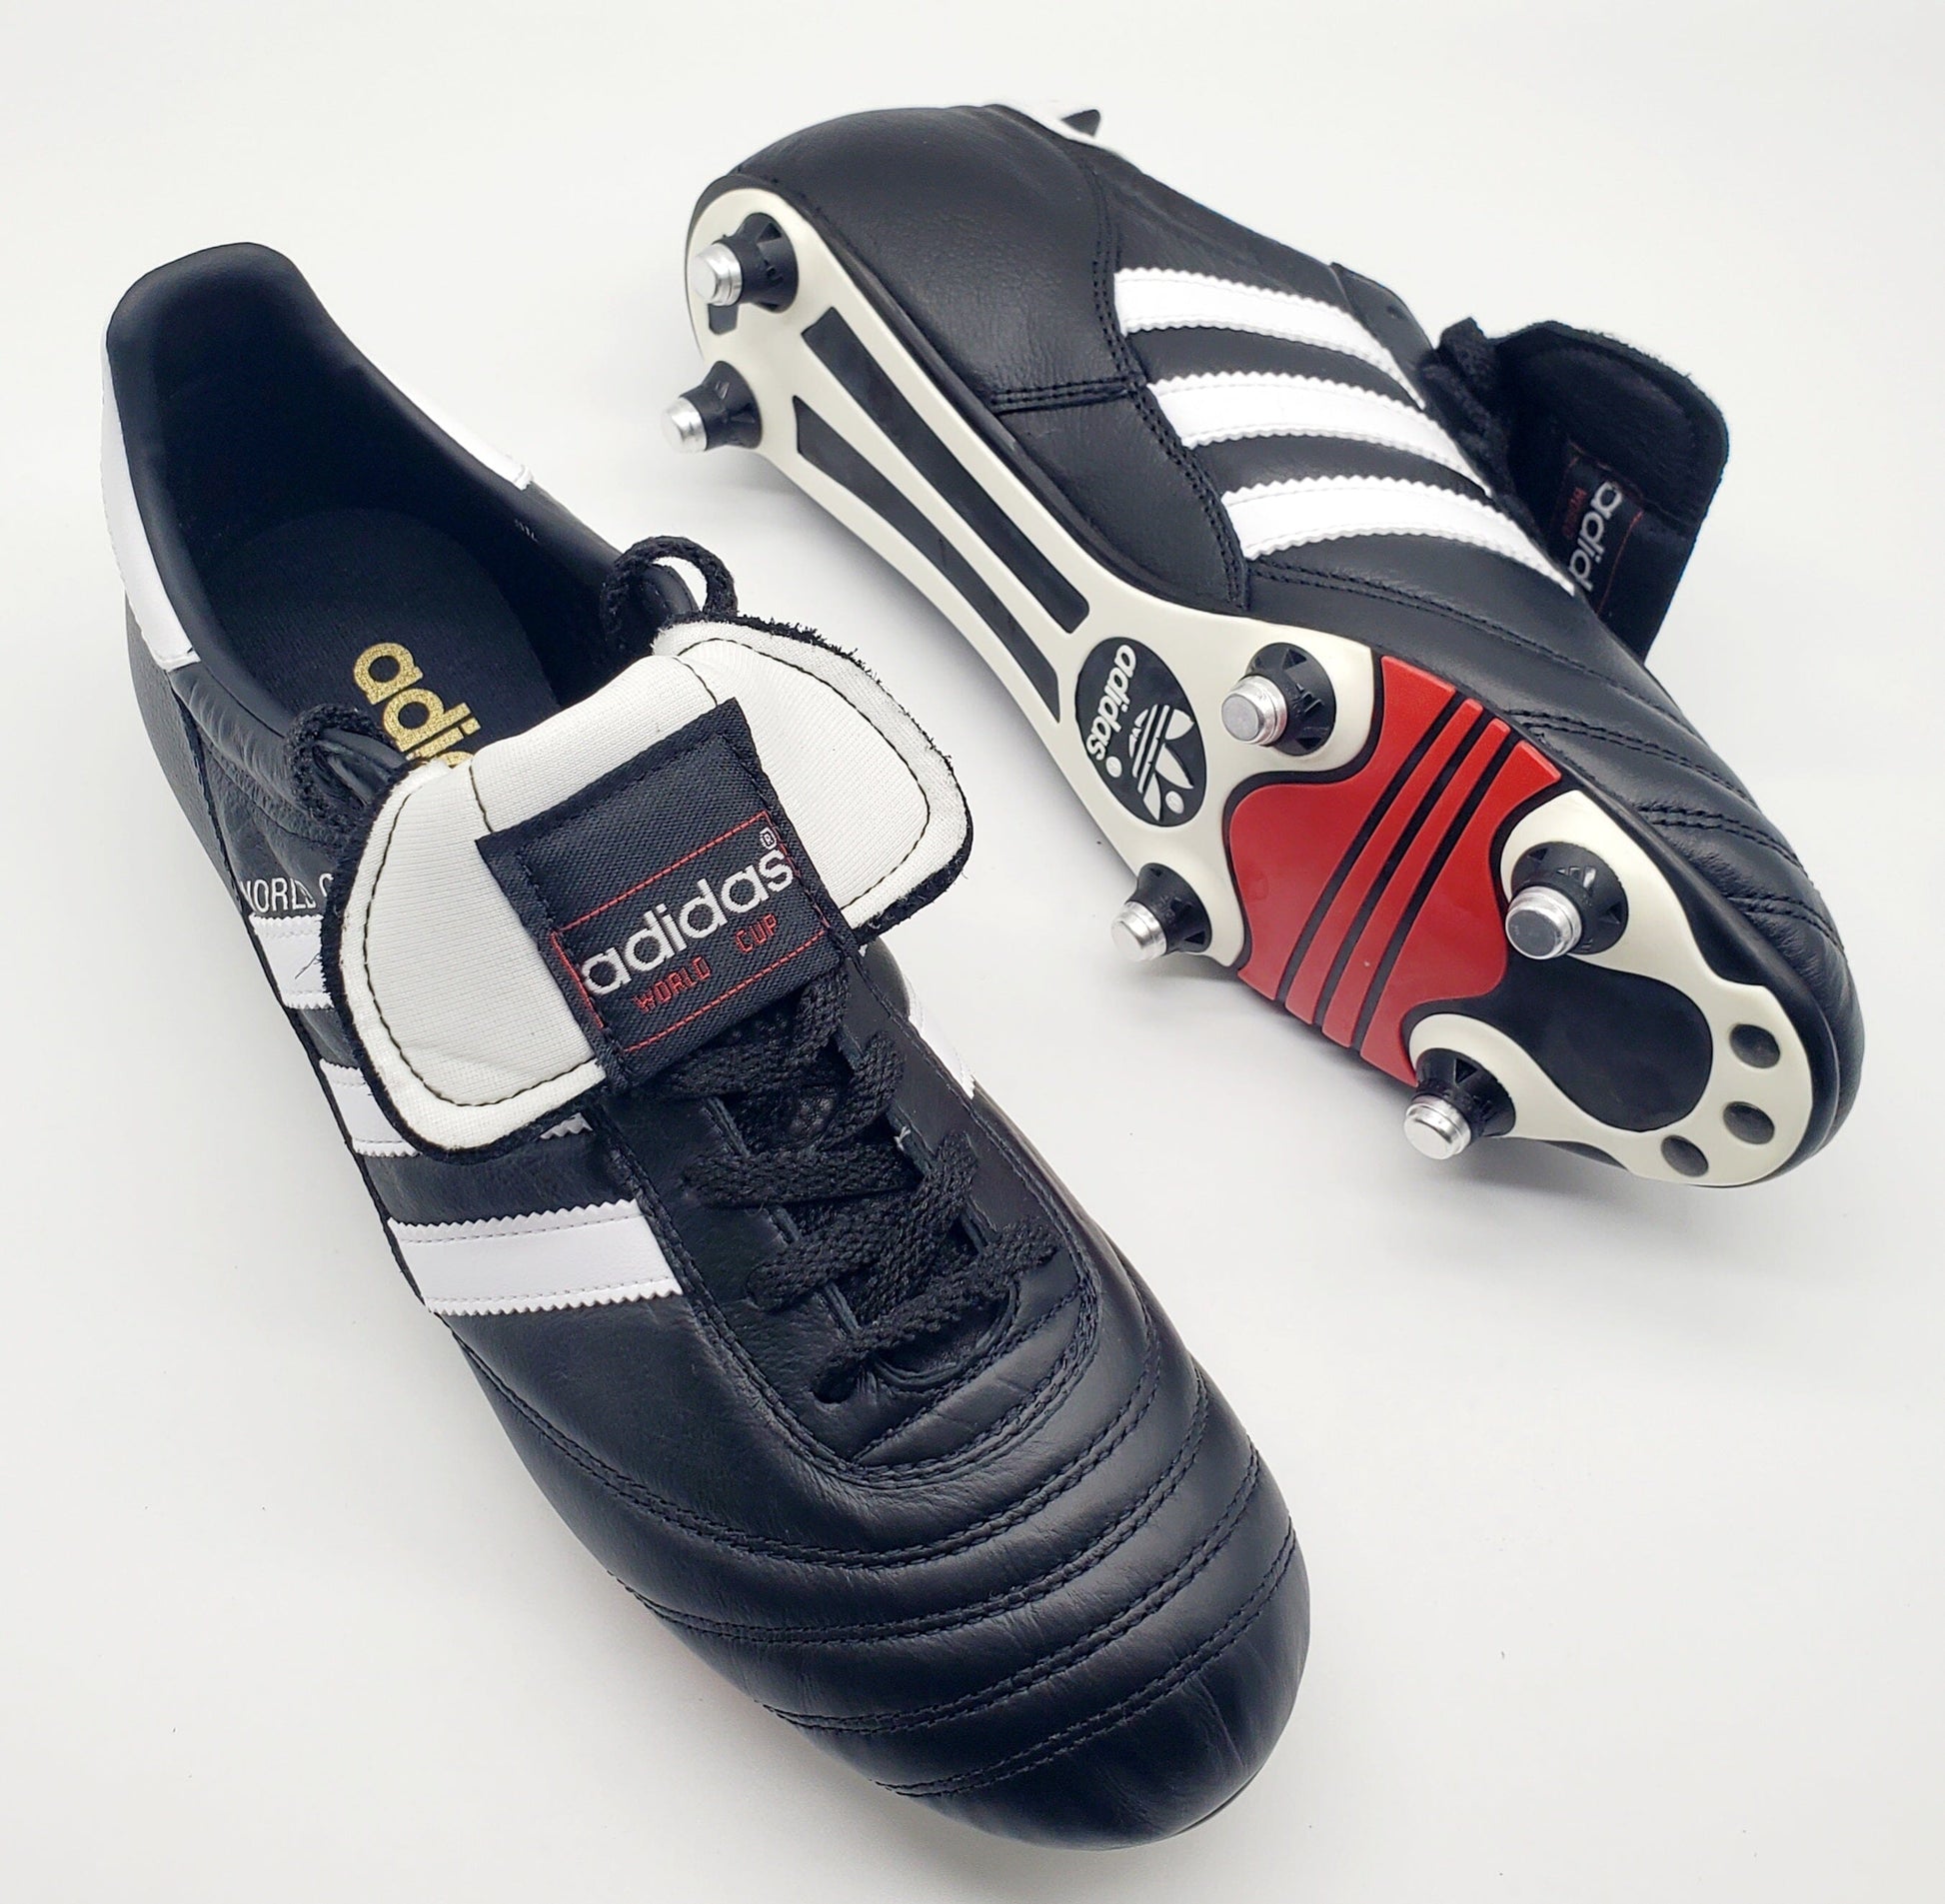 Voorspellen George Eliot Badkamer Buy Adidas World Cup SG at Classic Football Boots